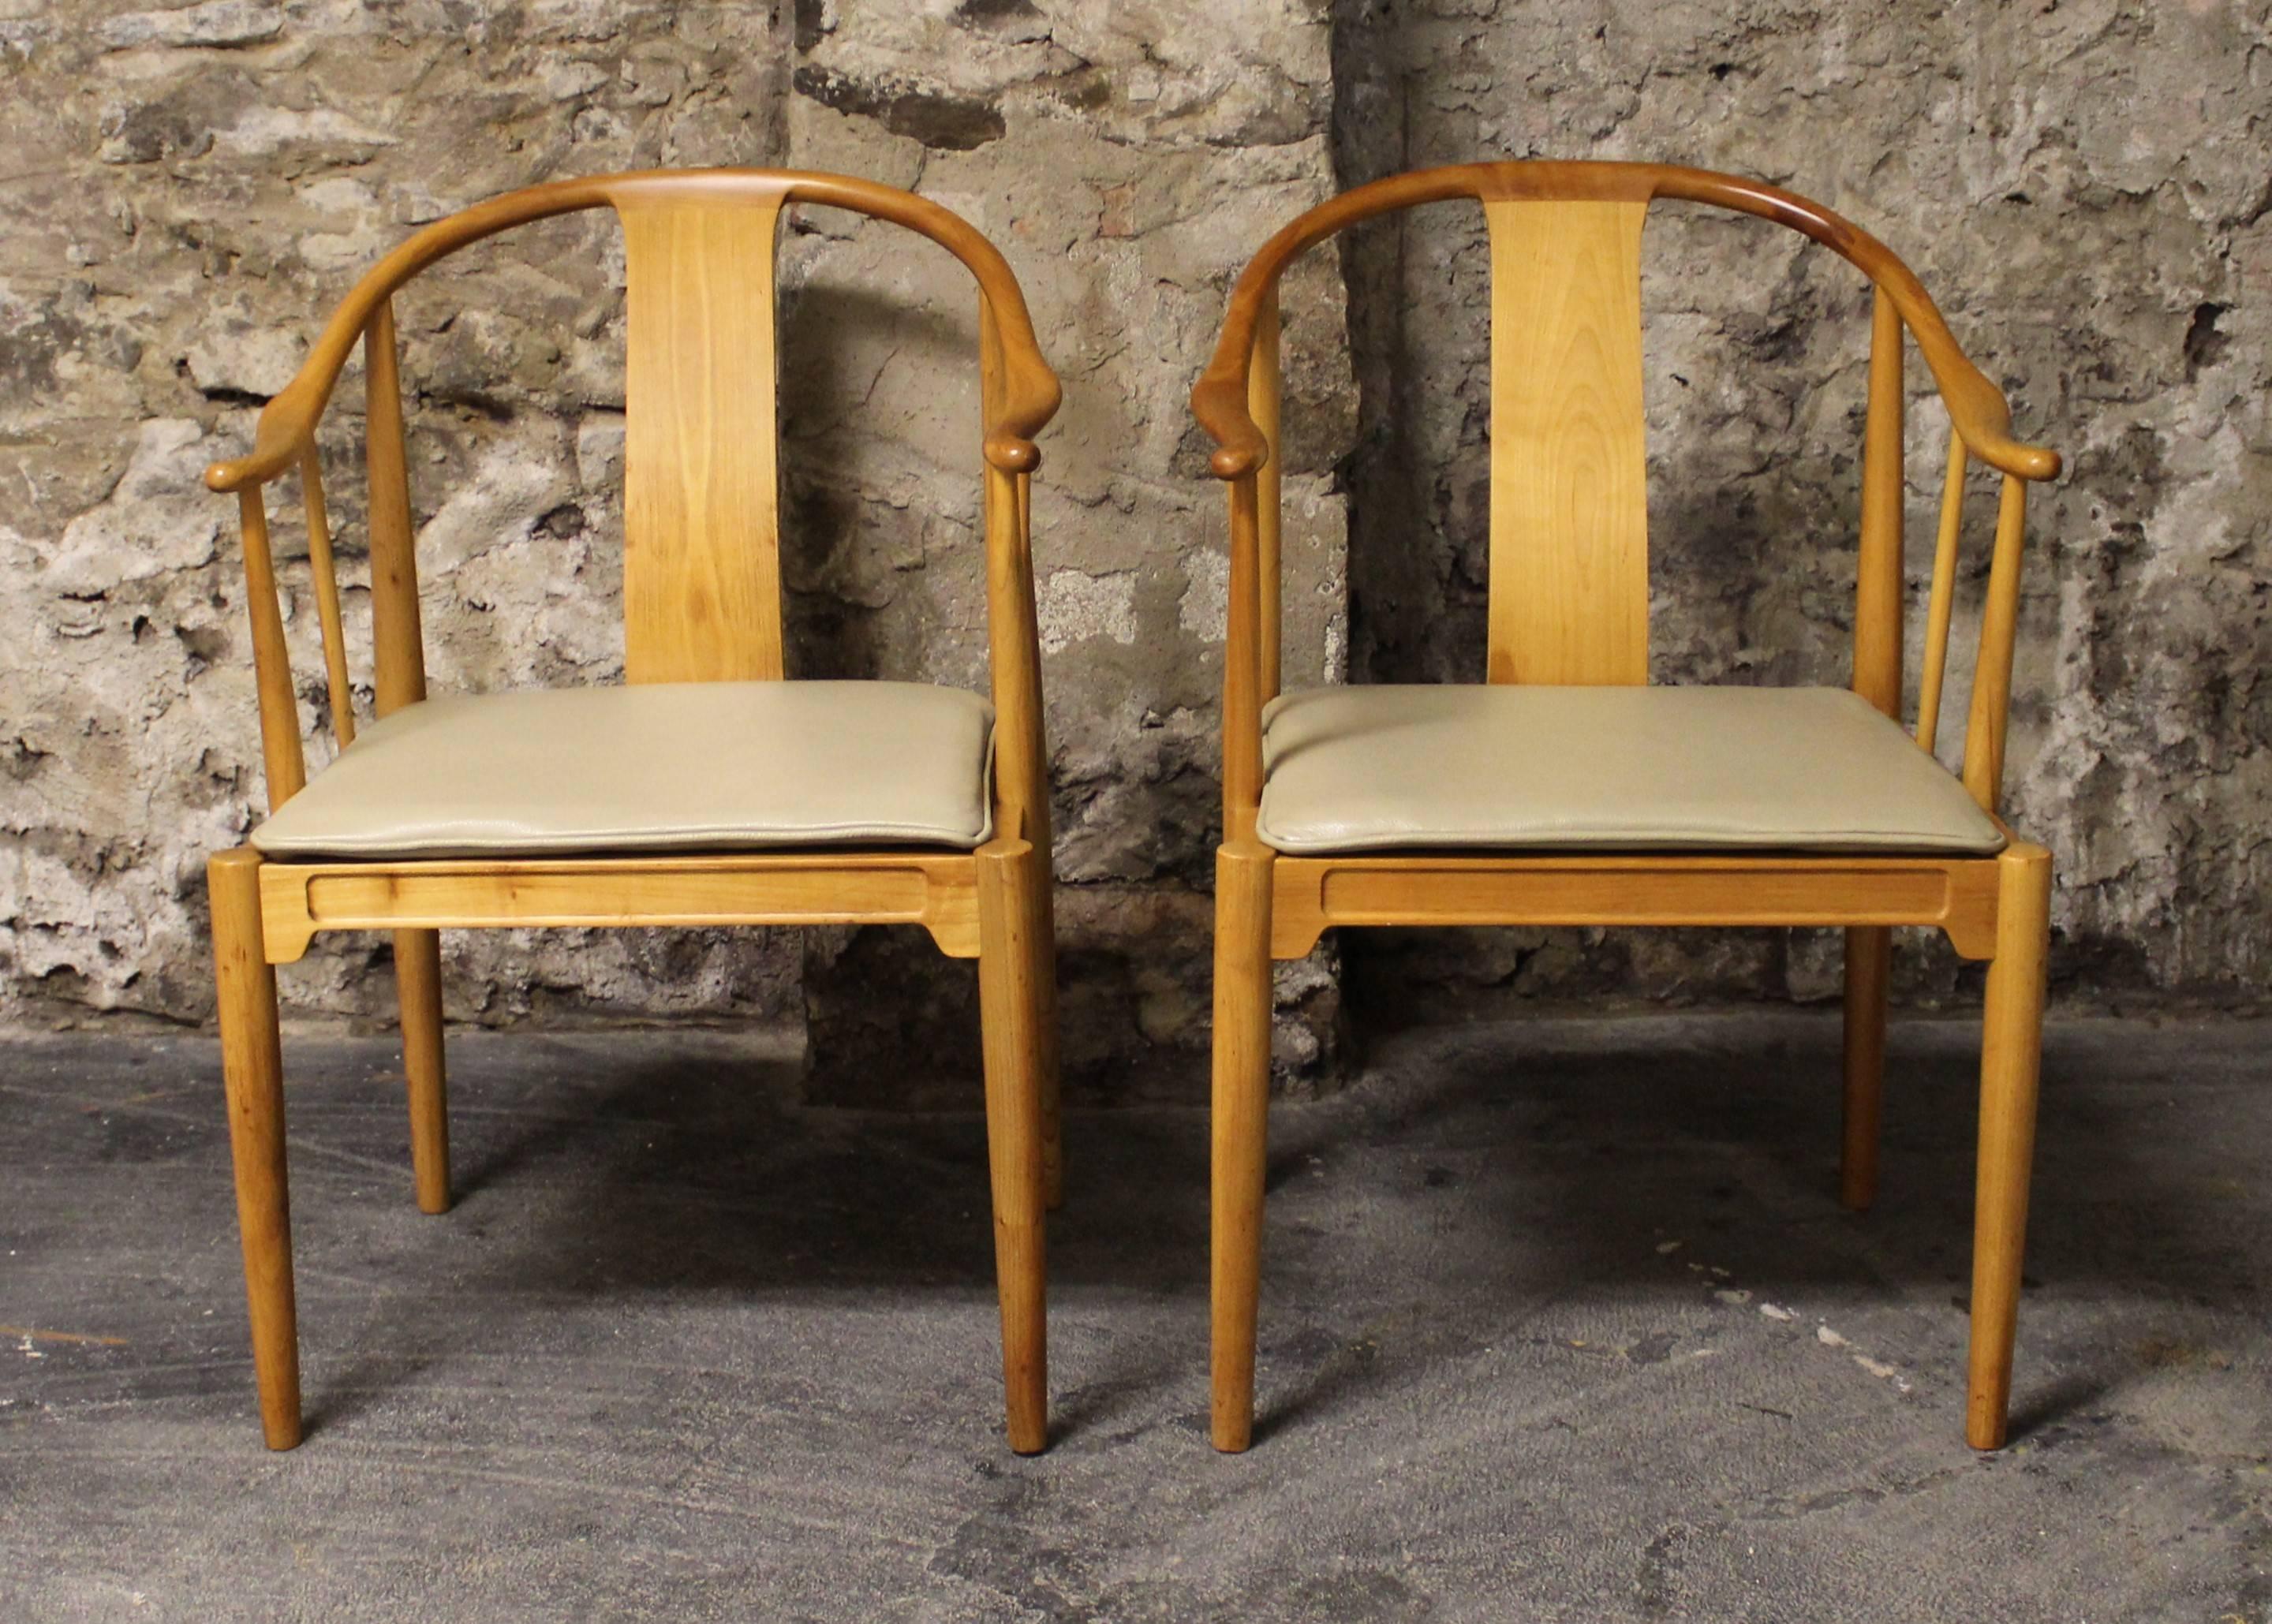 Beautiful pair of 'China' chairs by Hans J. Wegner for Fritz Hansen. These Classic Mid-Century Modern chairs are made from cheerywood and feature newly upholstered leather seats. The China chair was designed by Hans J. Wegner, in 1944 and it stands